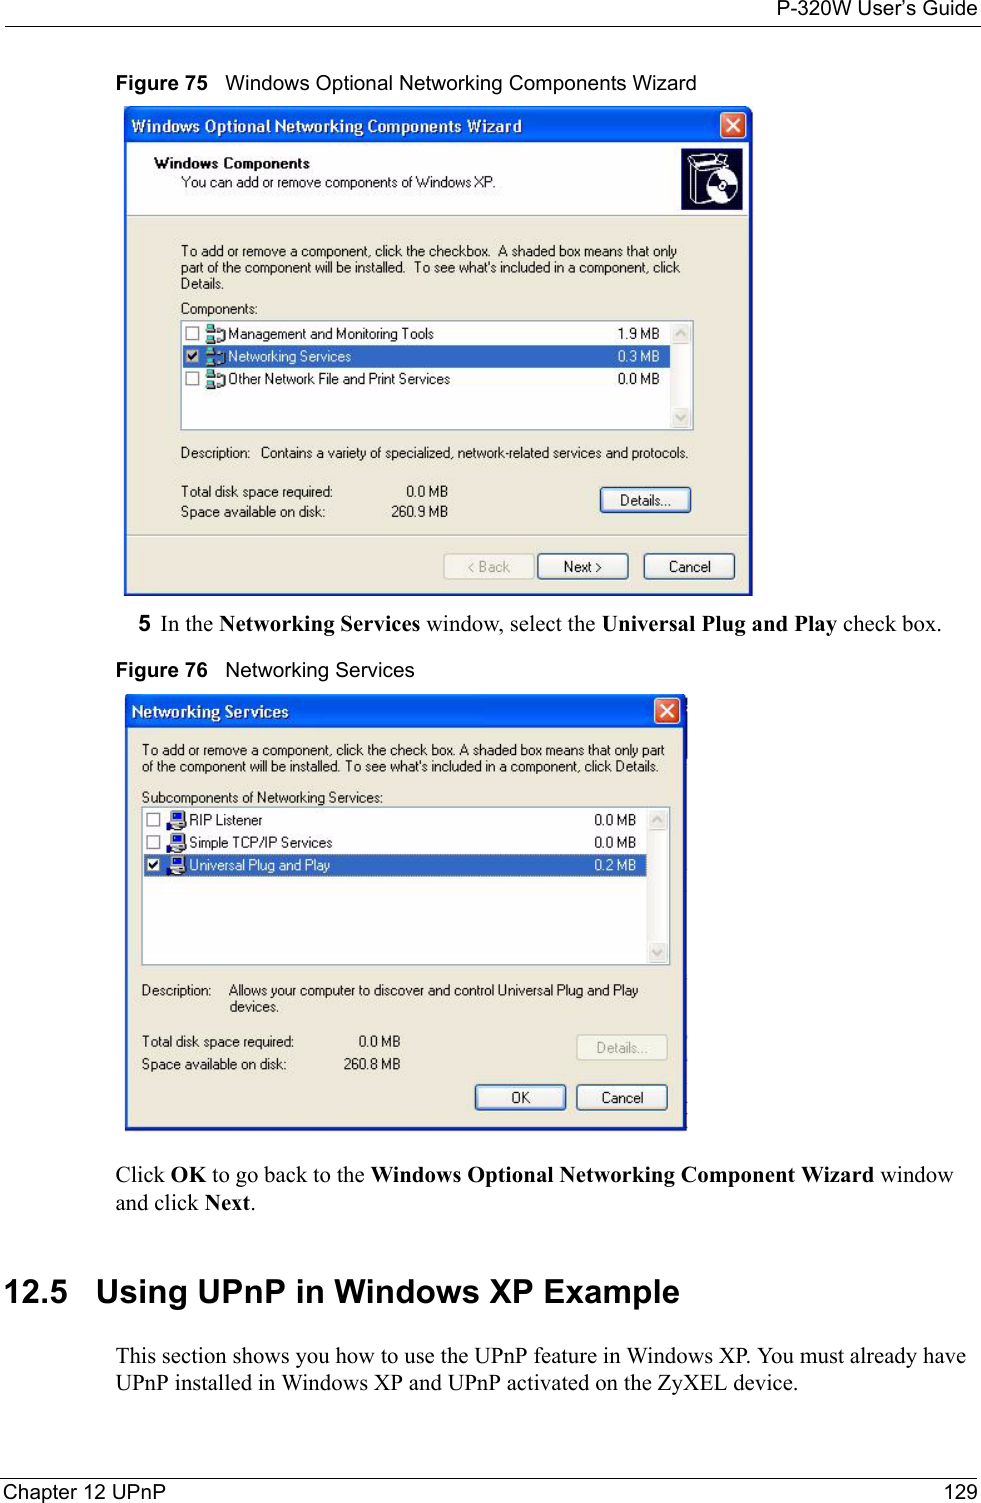 P-320W User’s GuideChapter 12 UPnP 129Figure 75   Windows Optional Networking Components Wizard5In the Networking Services window, select the Universal Plug and Play check box. Figure 76   Networking ServicesClick OK to go back to the Windows Optional Networking Component Wizard window and click Next.12.5   Using UPnP in Windows XP ExampleThis section shows you how to use the UPnP feature in Windows XP. You must already have UPnP installed in Windows XP and UPnP activated on the ZyXEL device.